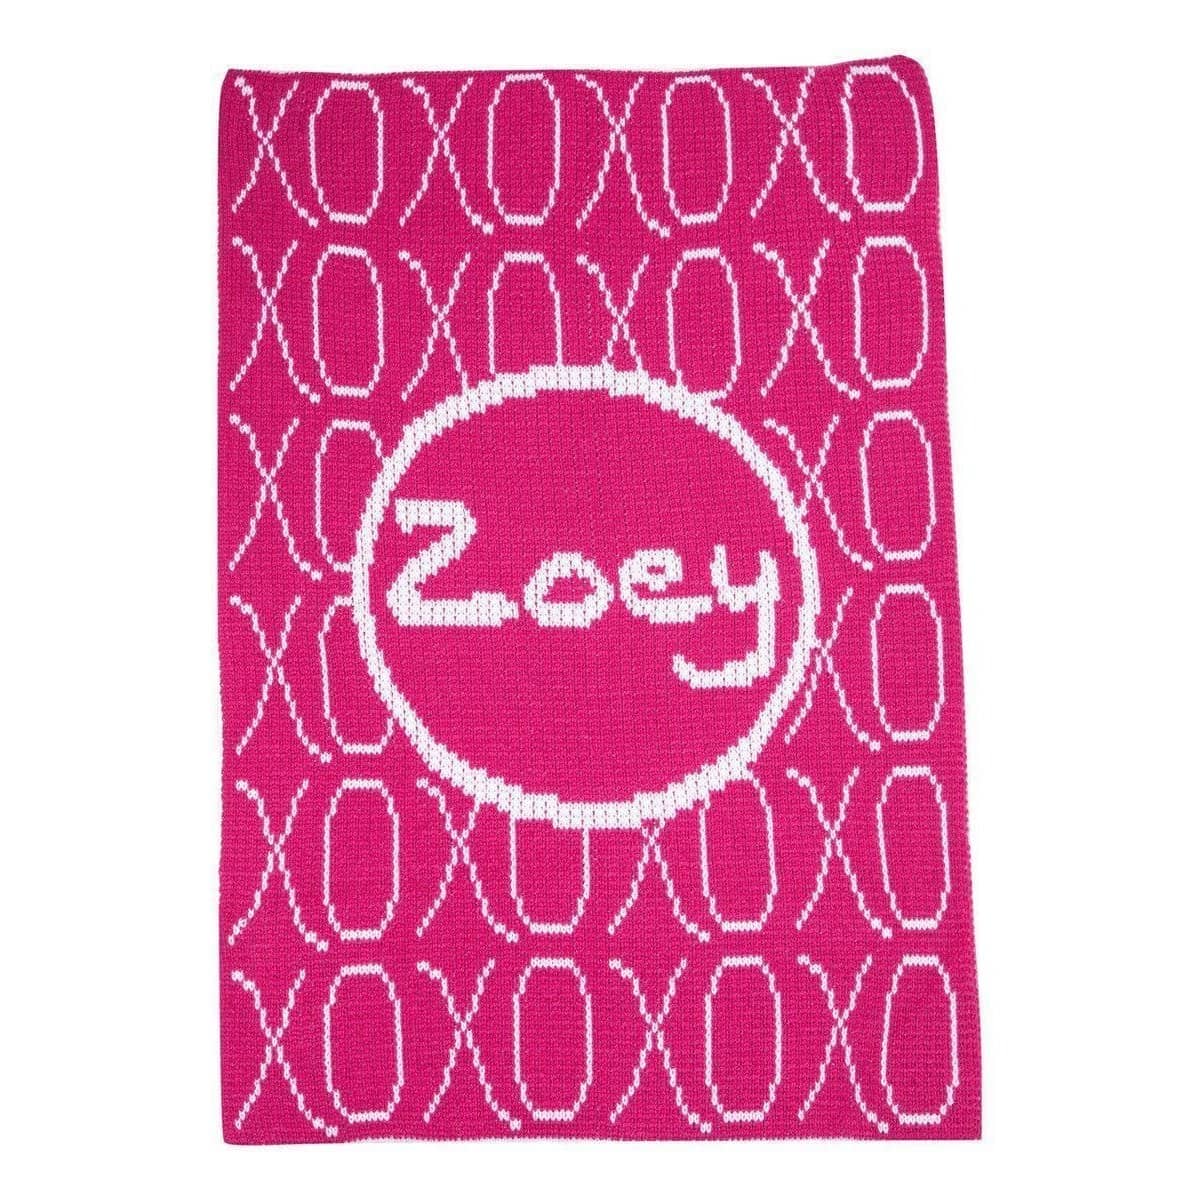 XOXO & Name Personalized Stroller Blanket or Baby Blanket-Baby Blanket-Jack and Jill Boutique